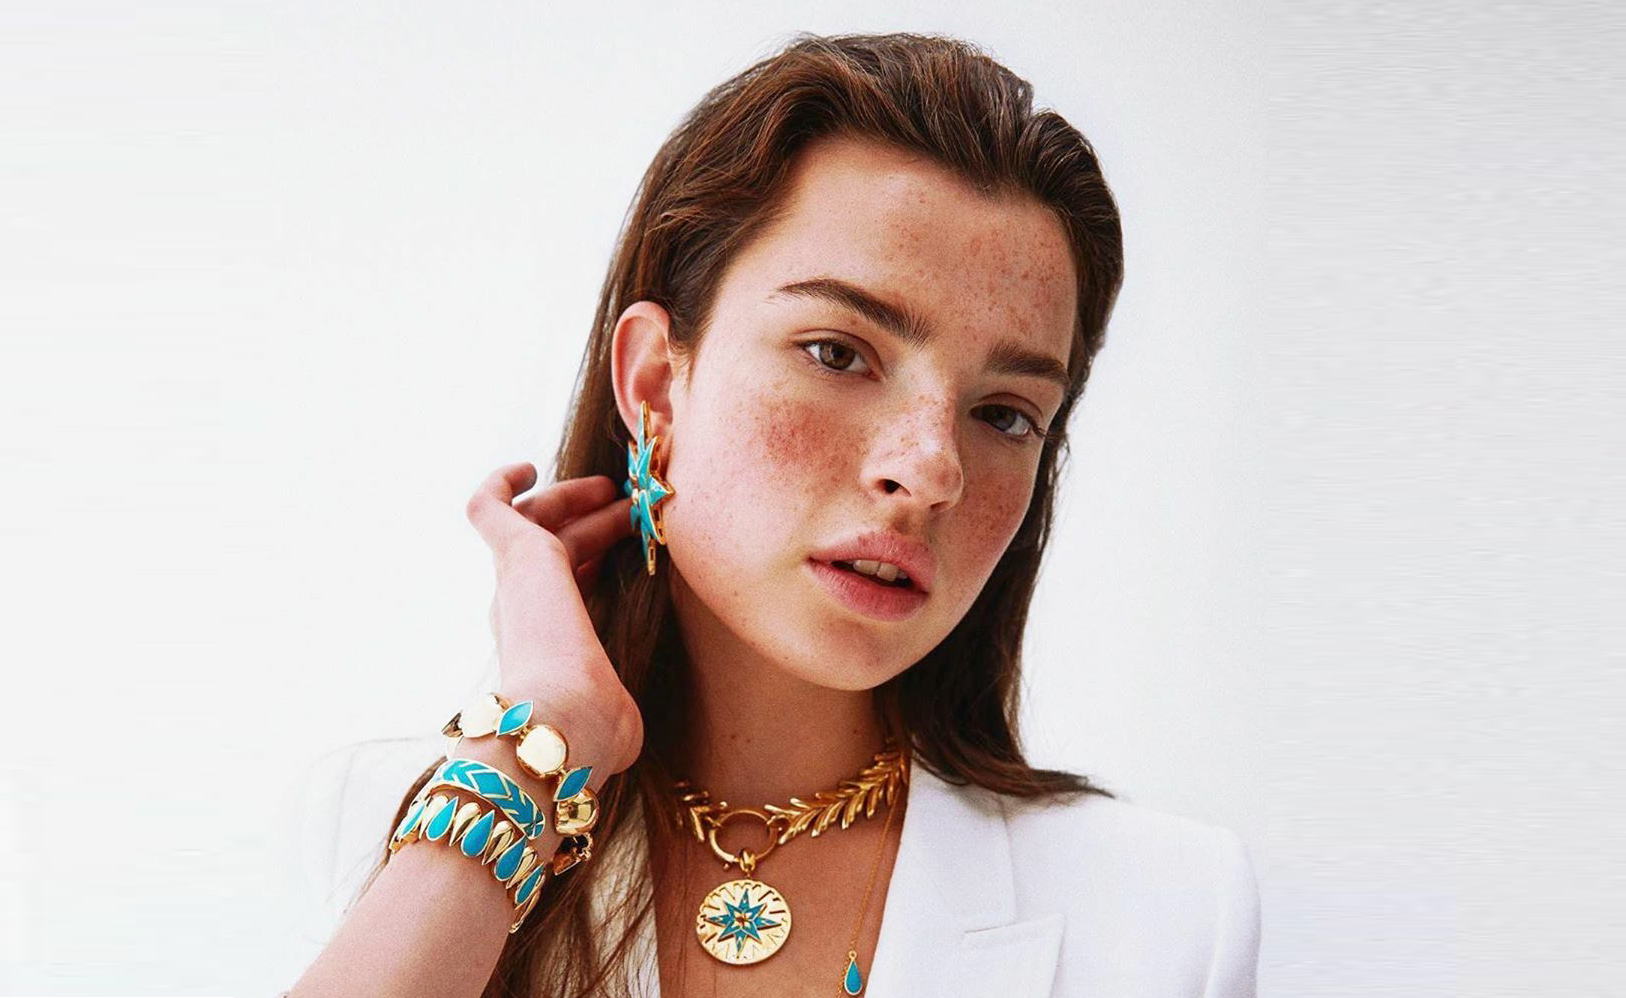 Nature Inspired, Mer"s Jewellery Latest SS19 Collection is Downright Breathtaking